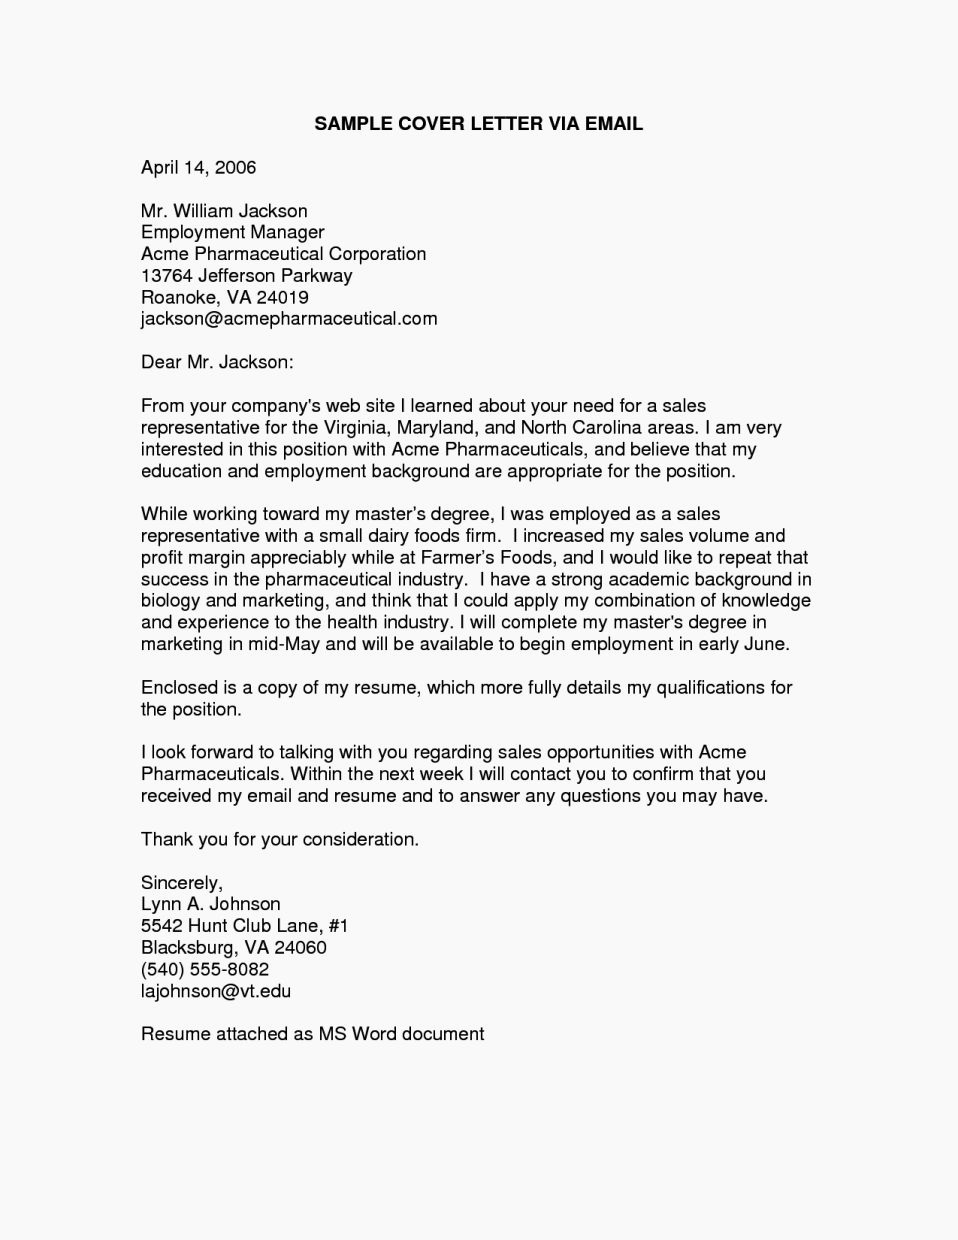 example cover letter for resume in email